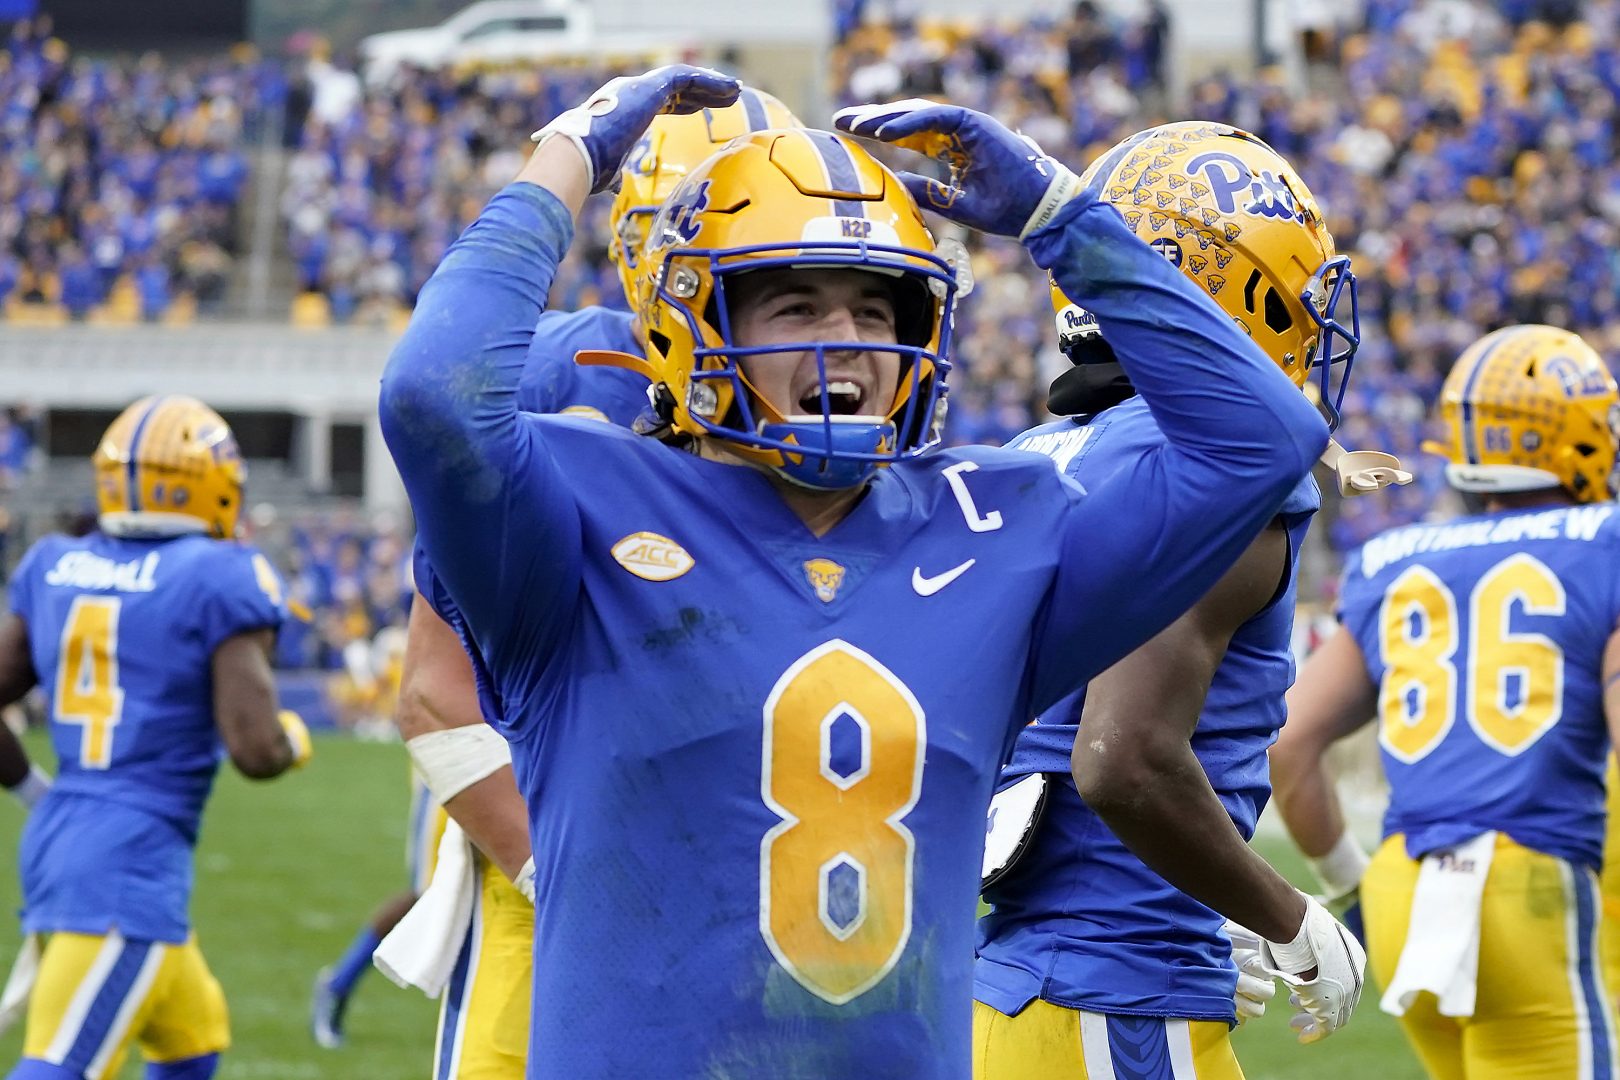 Pittsburgh quarterback Kenny Pickett (8) celebrates after throwing him a touchdown pass to wide receiver Jordan Addison (3) during the first half of an NCAA college football game against Clemson, Saturday, Oct. 23, 2021, in Pittsburgh. 